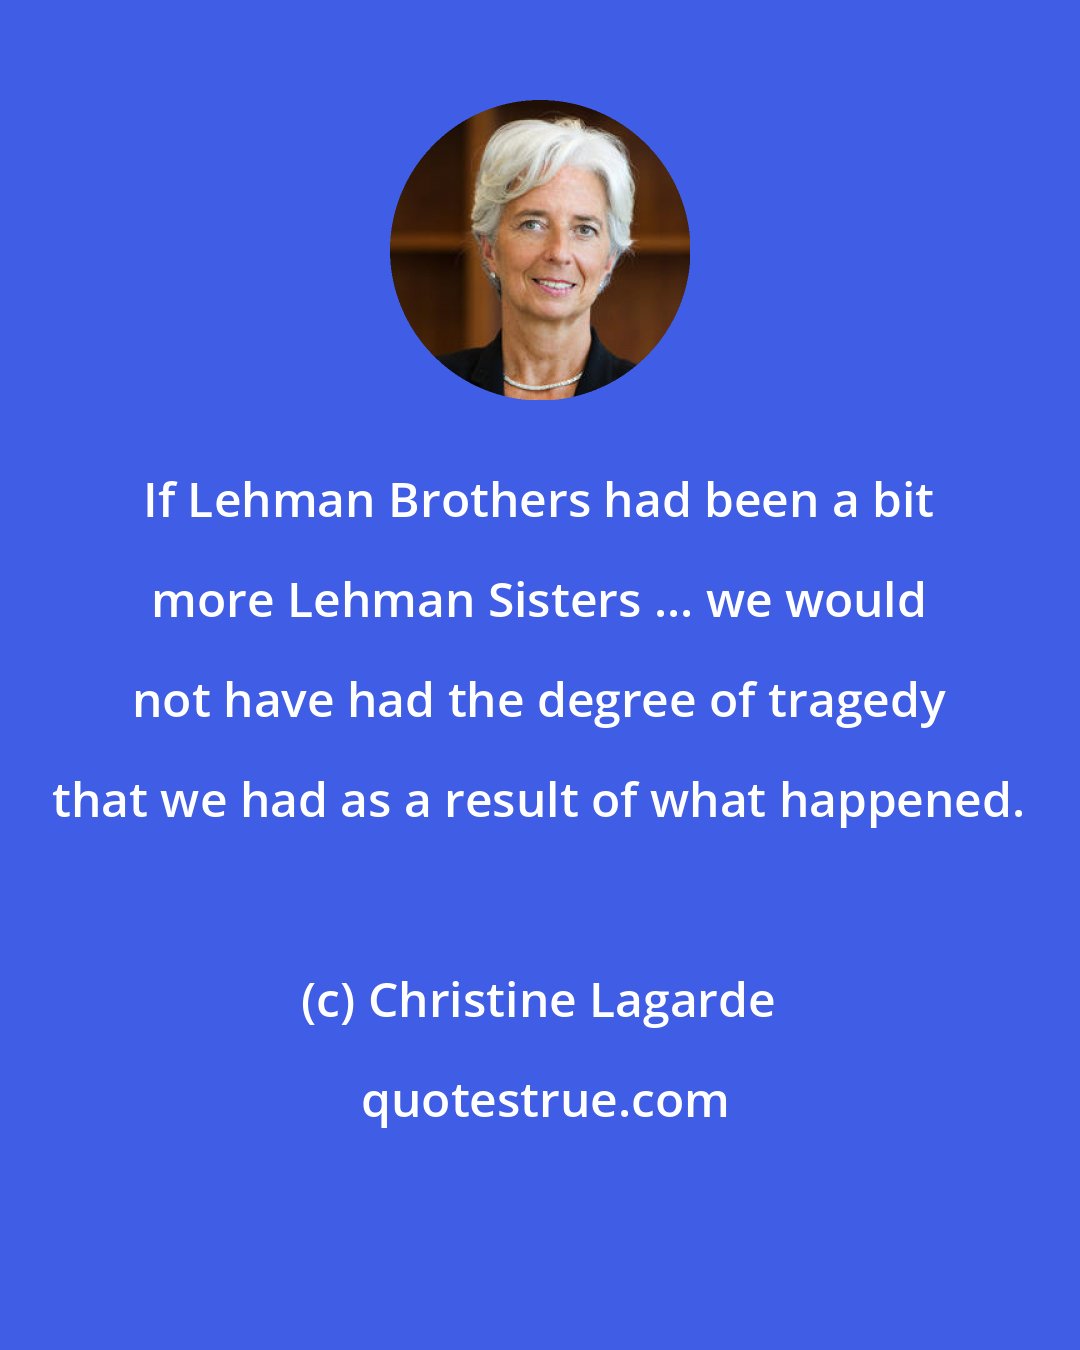 Christine Lagarde: If Lehman Brothers had been a bit more Lehman Sisters ... we would not have had the degree of tragedy that we had as a result of what happened.